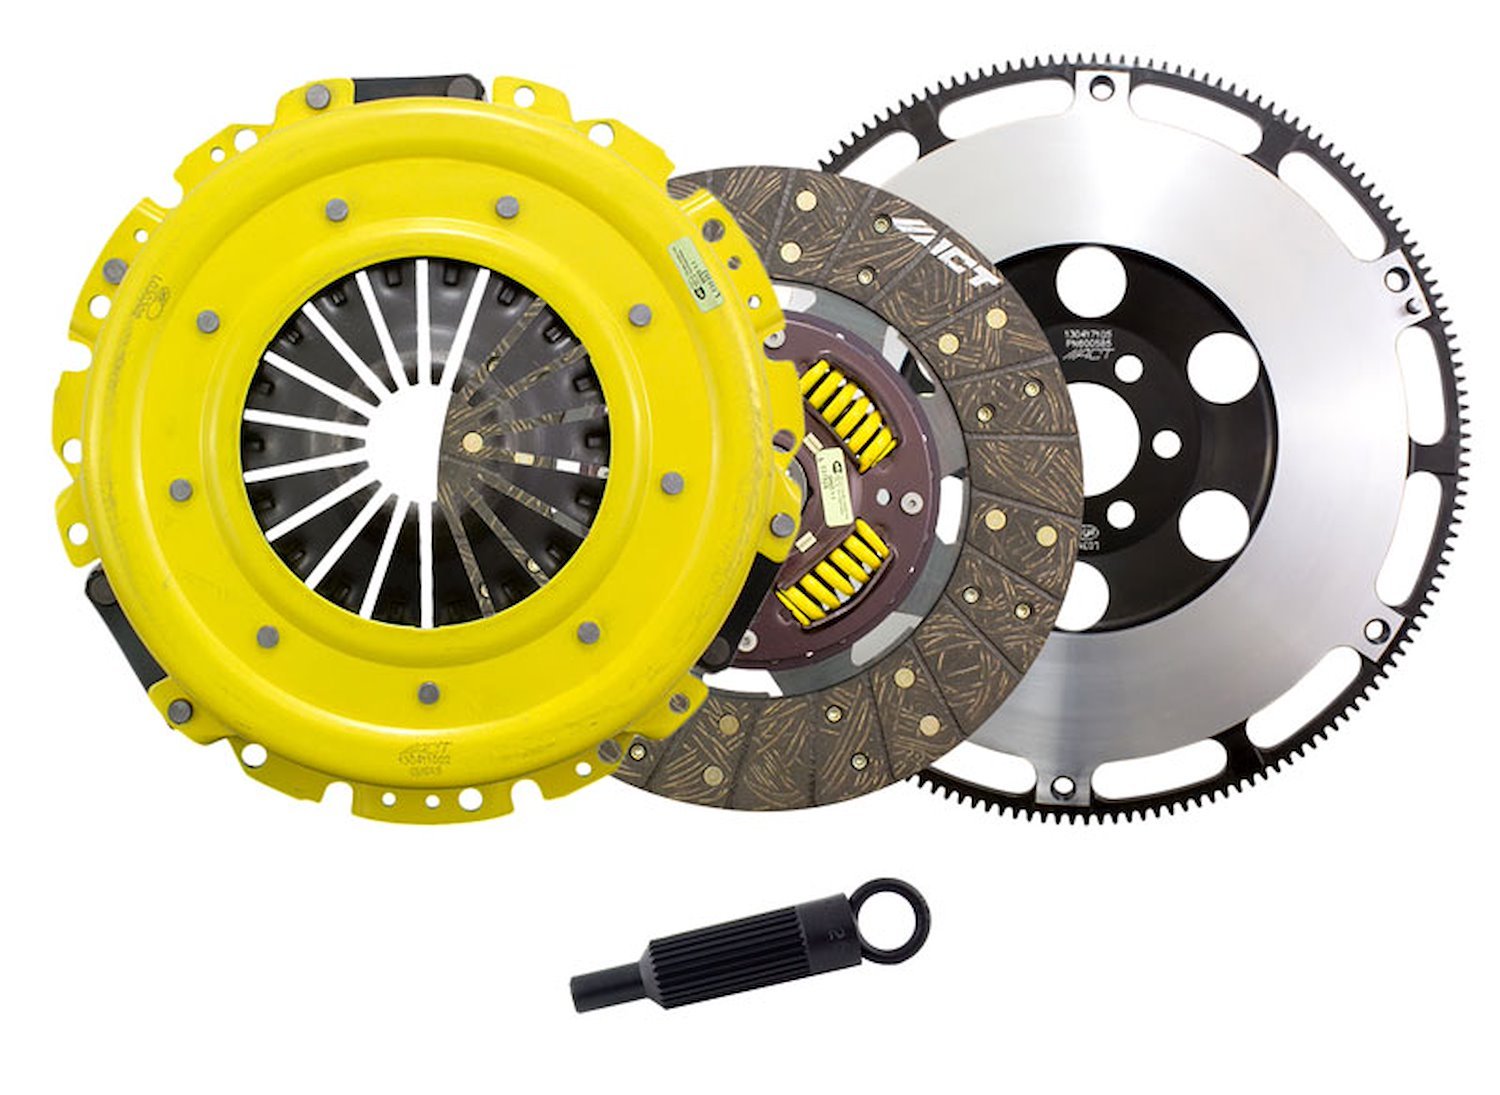 HD/Performance Street Sprung Transmission Clutch Kit Fits Select GM